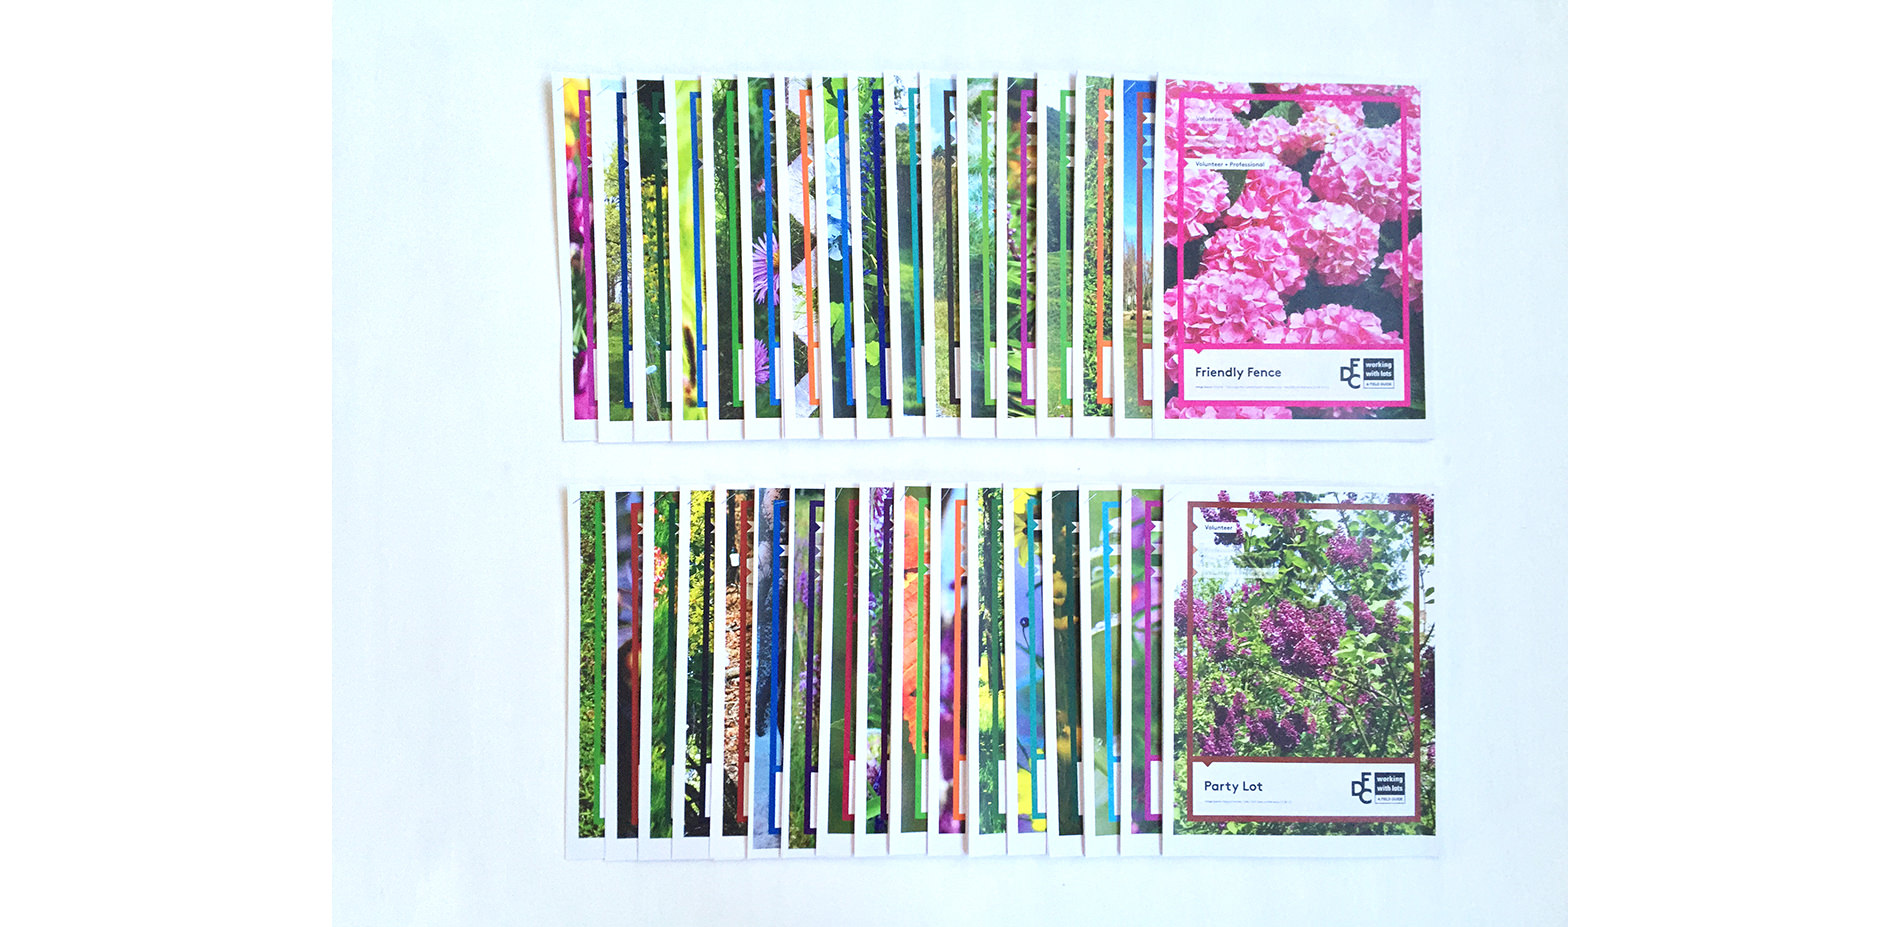 Tear-out Trading Cards of the Designs in the Field Guide